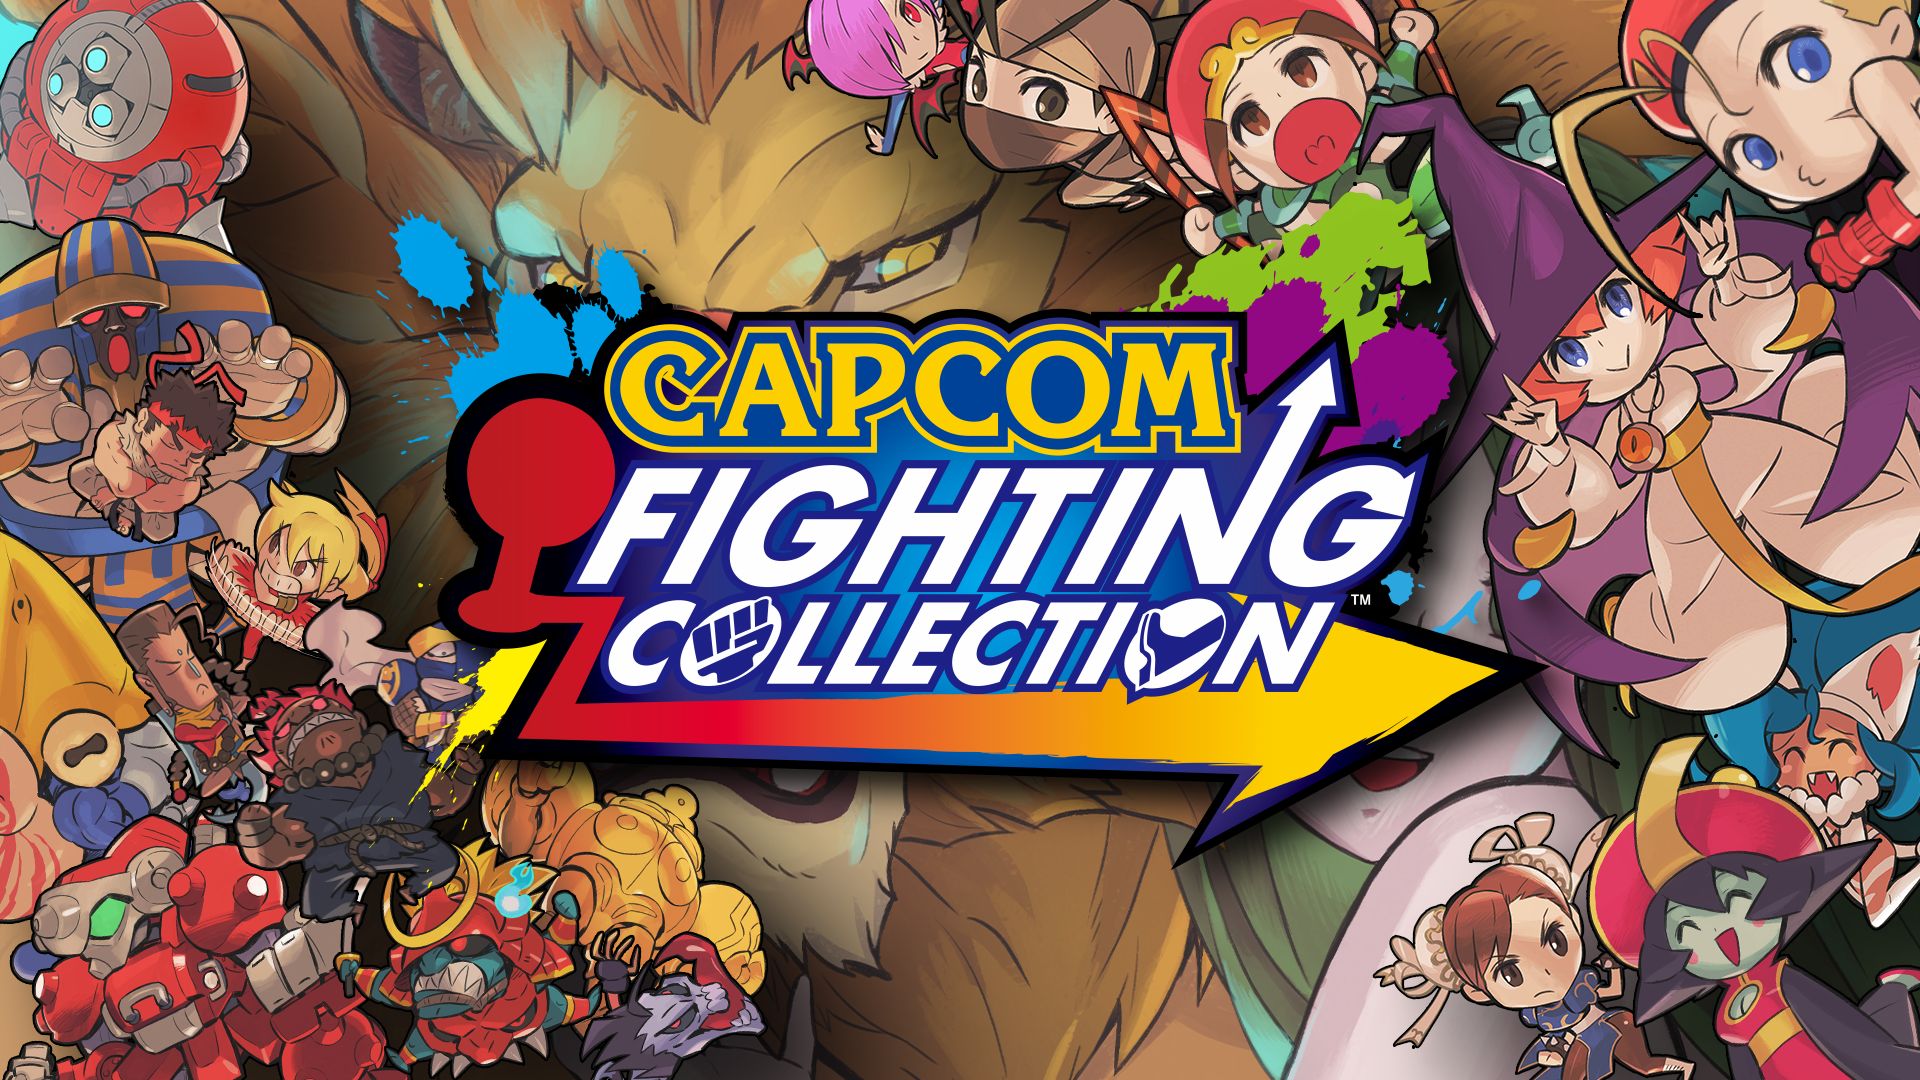 Video For Capcom Fighting Collection Drops on June 24, Pre-order Today on the Xbox Store